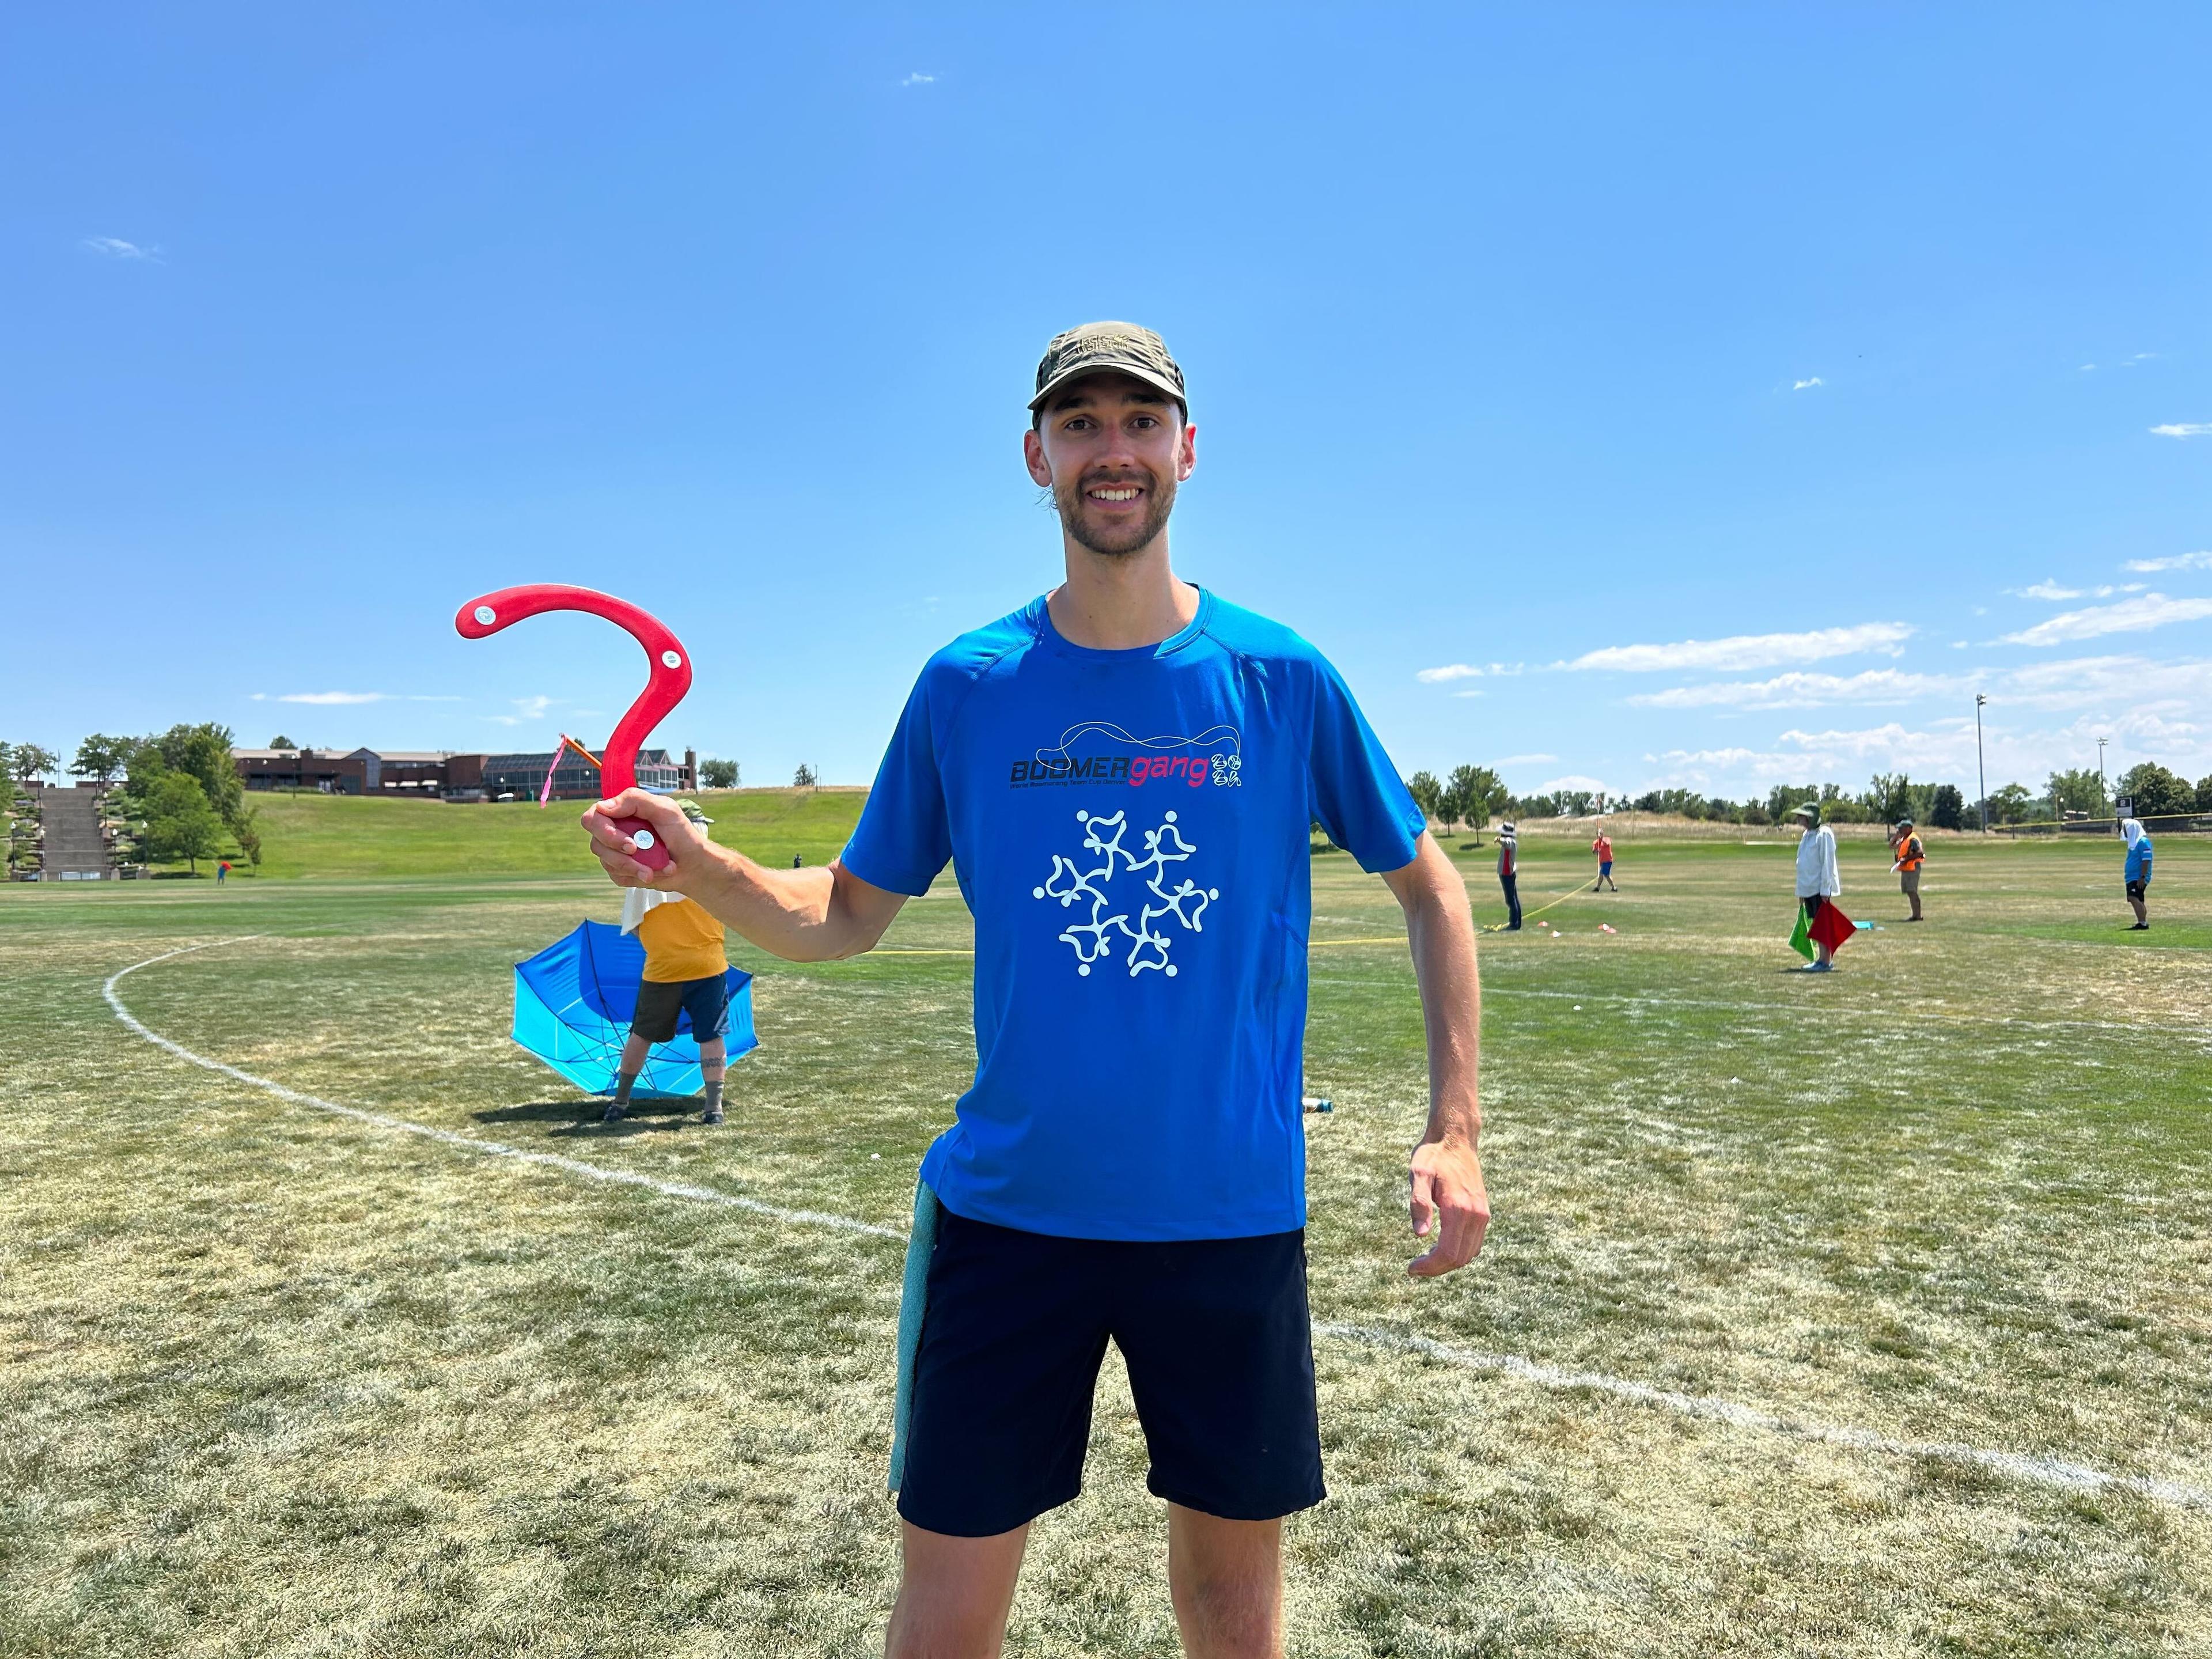 Man in blue shirt and grey cap poses with red boomerang he uses to make long distance shots.